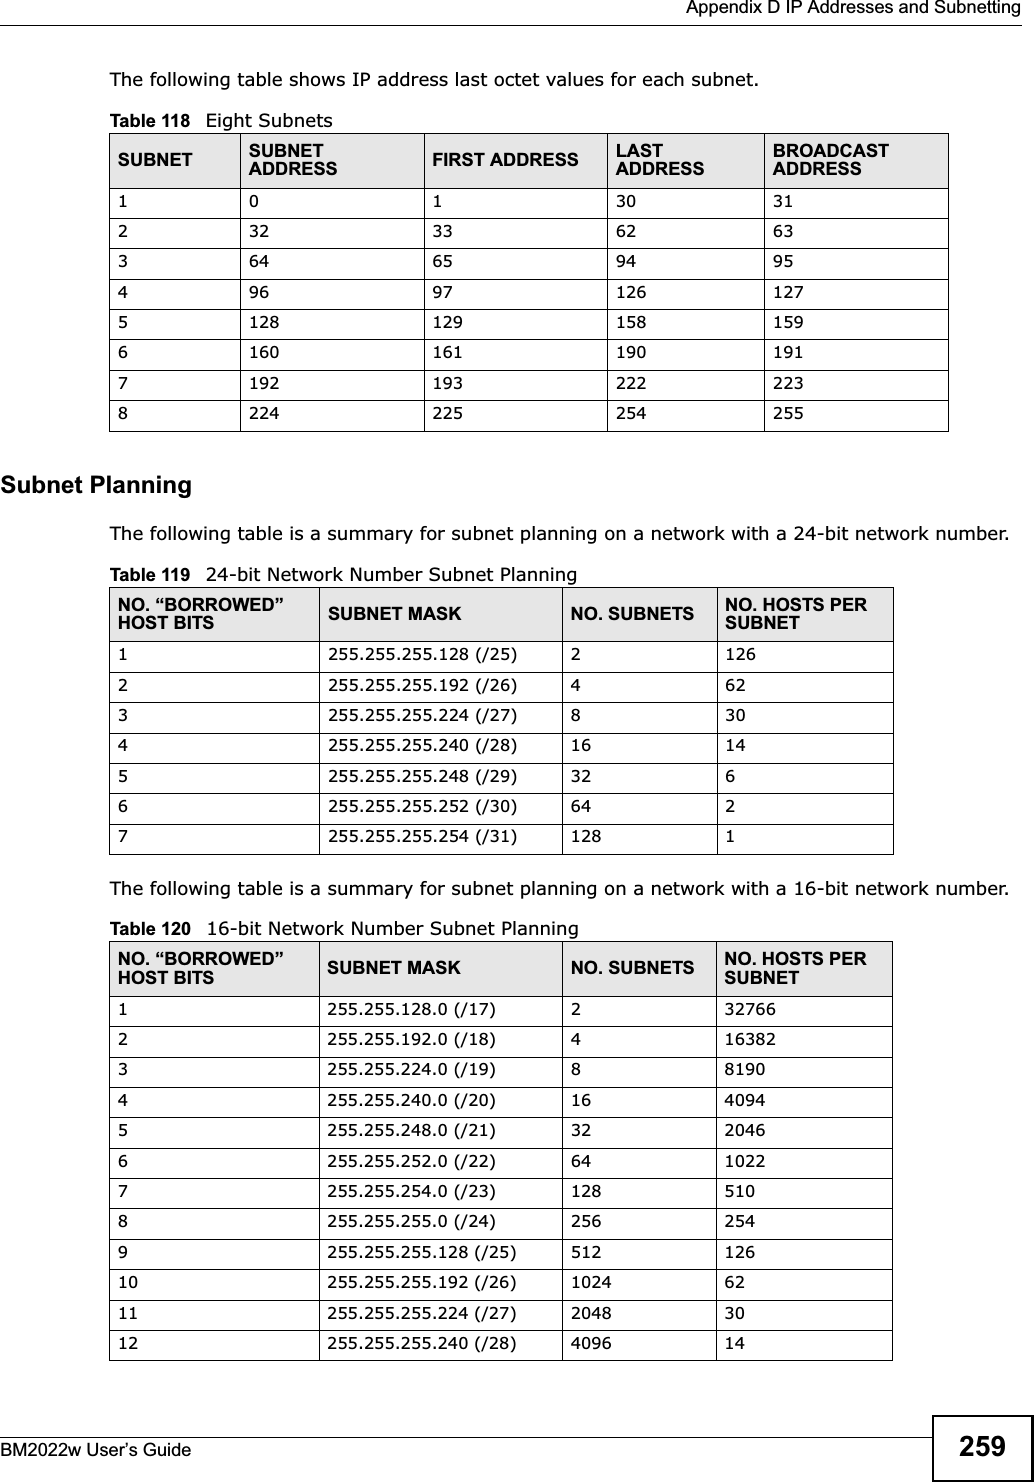  Appendix D IP Addresses and SubnettingBM2022w User’s Guide 259The following table shows IP address last octet values for each subnet.Subnet PlanningThe following table is a summary for subnet planning on a network with a 24-bit network number.The following table is a summary for subnet planning on a network with a 16-bit network number. Table 118   Eight SubnetsSUBNET SUBNETADDRESS FIRST ADDRESS LAST ADDRESSBROADCAST ADDRESS1 0 1 30 31232 33 62 63364 65 94 95496 97 126 1275128 129 158 1596160 161 190 1917192 193 222 2238224 225 254 255Table 119   24-bit Network Number Subnet PlanningNO. “BORROWED” HOST BITS SUBNET MASK NO. SUBNETS NO. HOSTS PER SUBNET1255.255.255.128 (/25) 21262255.255.255.192 (/26) 4623255.255.255.224 (/27) 8304255.255.255.240 (/28) 16 145255.255.255.248 (/29) 32 66255.255.255.252 (/30) 64 27255.255.255.254 (/31) 128 1Table 120   16-bit Network Number Subnet PlanningNO. “BORROWED” HOST BITS SUBNET MASK NO. SUBNETS NO. HOSTS PER SUBNET1255.255.128.0 (/17) 2327662255.255.192.0 (/18) 4163823255.255.224.0 (/19) 881904255.255.240.0 (/20) 16 40945255.255.248.0 (/21) 32 20466255.255.252.0 (/22) 64 10227255.255.254.0 (/23) 128 5108255.255.255.0 (/24) 256 2549255.255.255.128 (/25) 512 12610 255.255.255.192 (/26) 1024 6211 255.255.255.224 (/27) 2048 3012 255.255.255.240 (/28) 4096 14